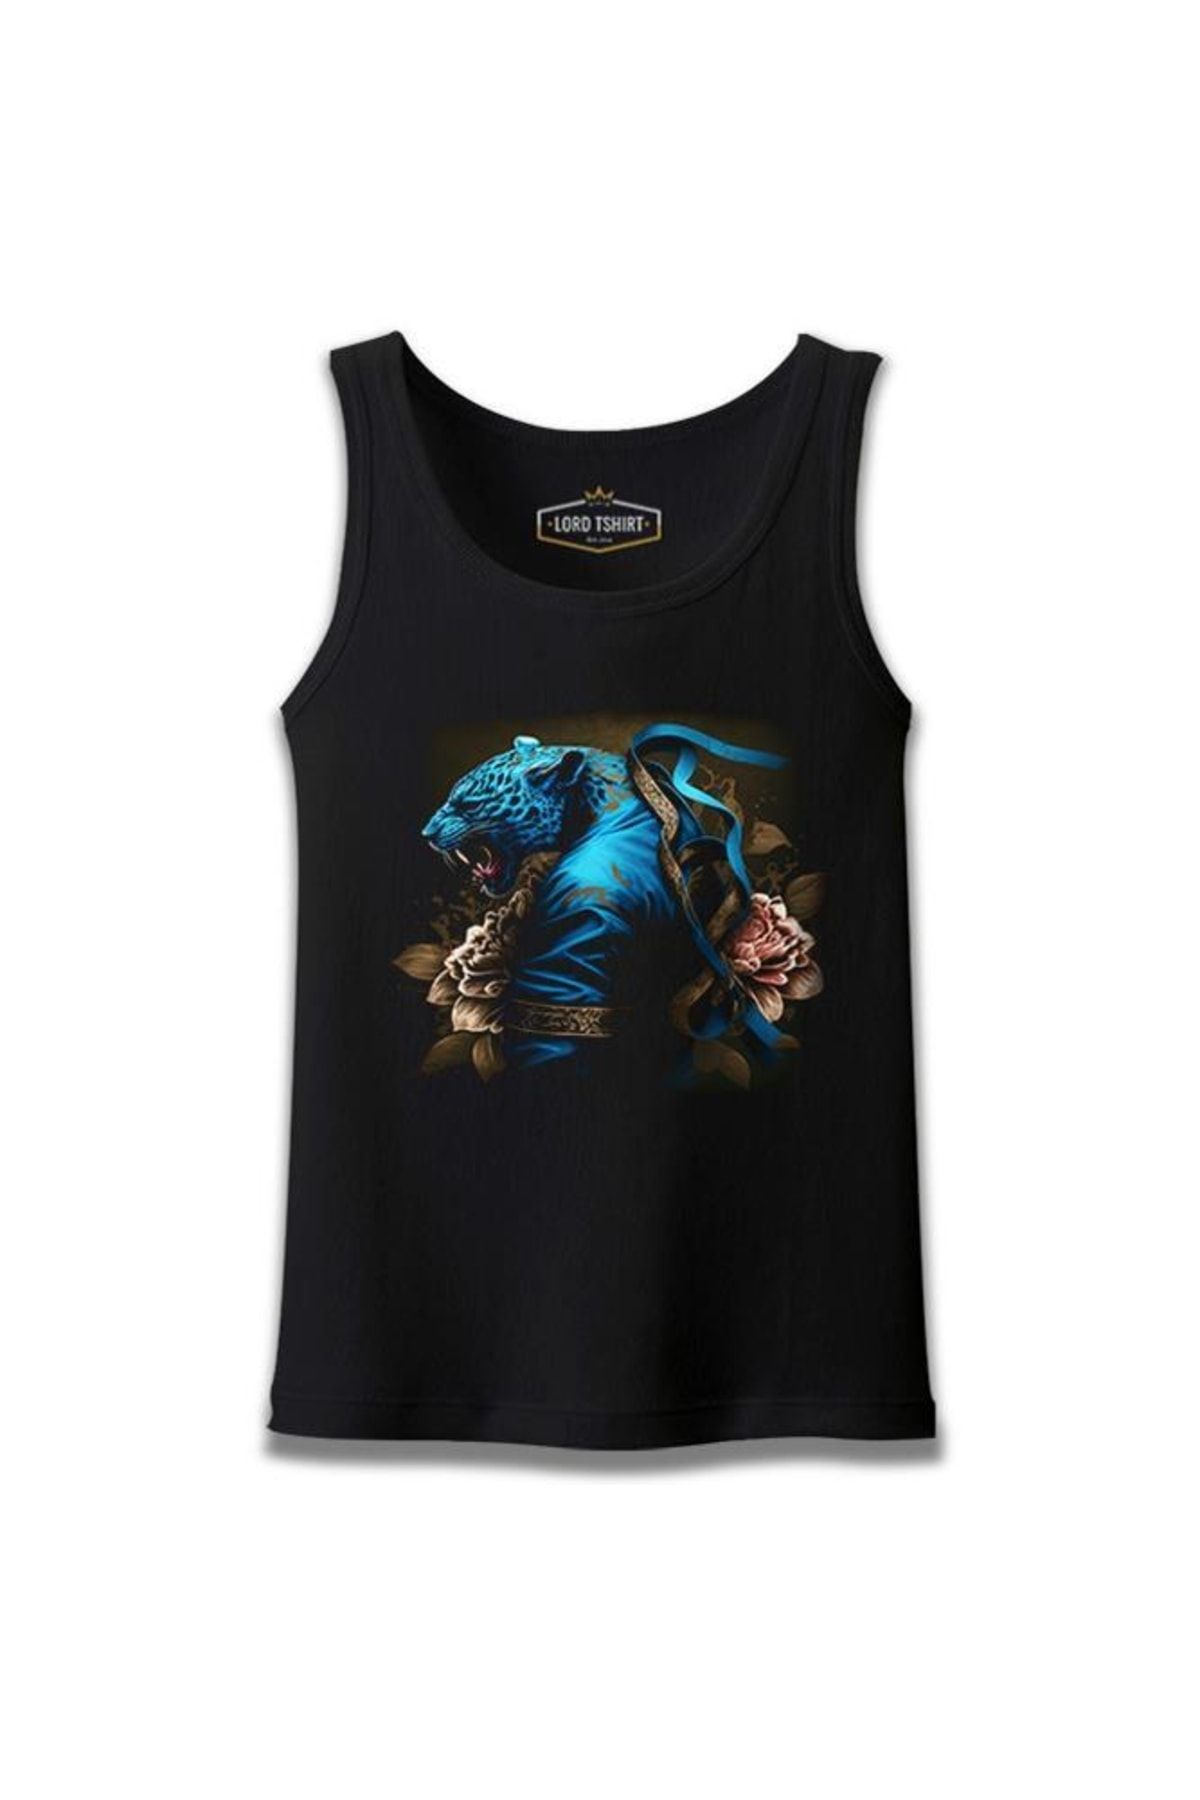 Lord T-Shirt Blue Chinese Tiger With Flowers And Ribbon Siyah Erkek Atlet